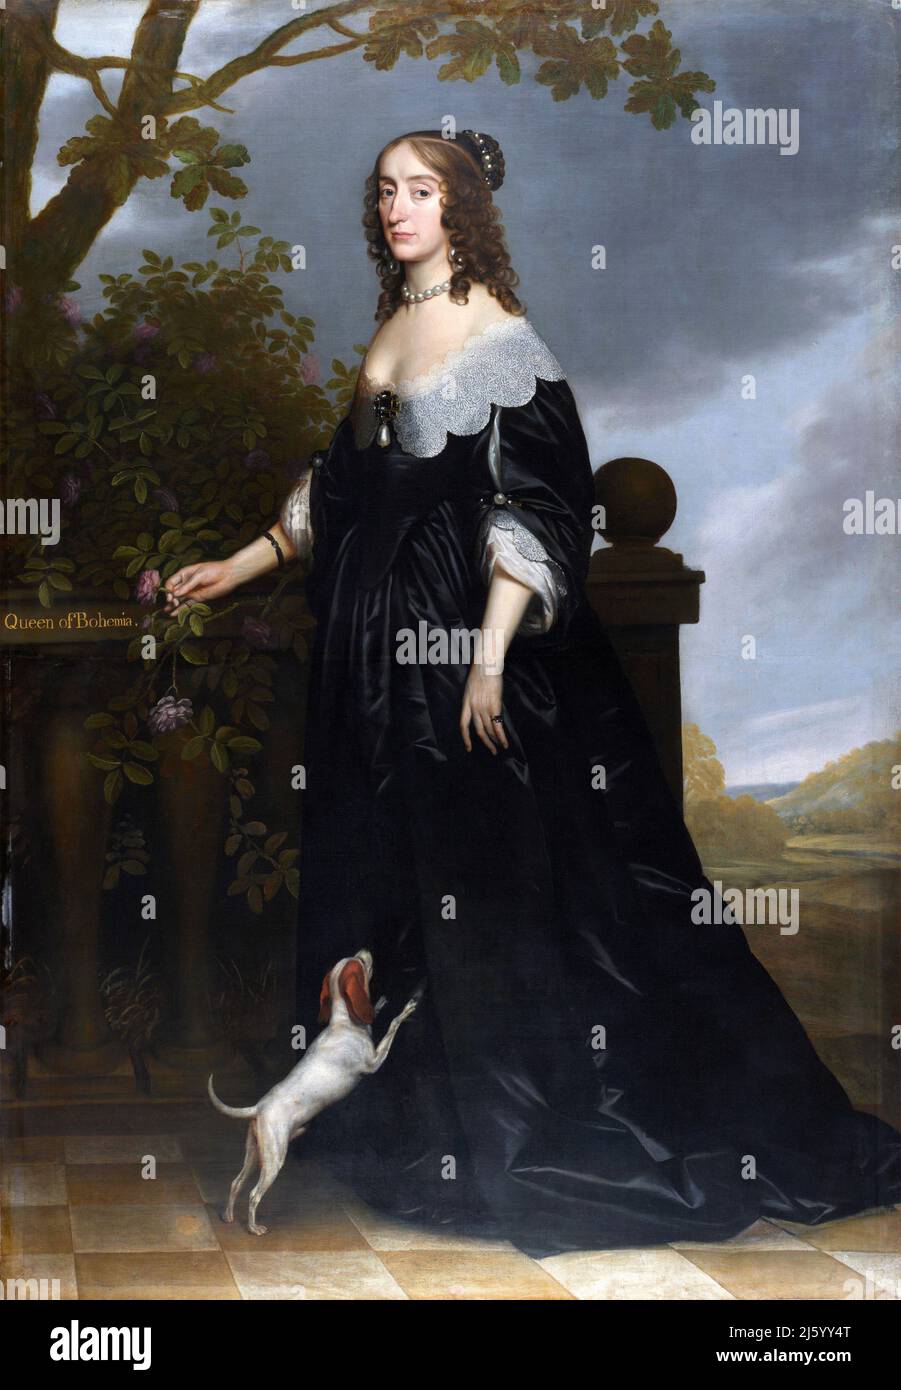 Elizabeth Queen of Bohemia, portraity by the Dutch Golden Age painter, Gerrit van Honthorst (1592-1656), oil on canvas, 1642. Elizabeth was the wife of Frederick V, Elector Palatine and often referred to as The Winter Queen. She was the second child and eldest daughter of King James VI and I of Scotland, England, and Ireland. Stock Photo